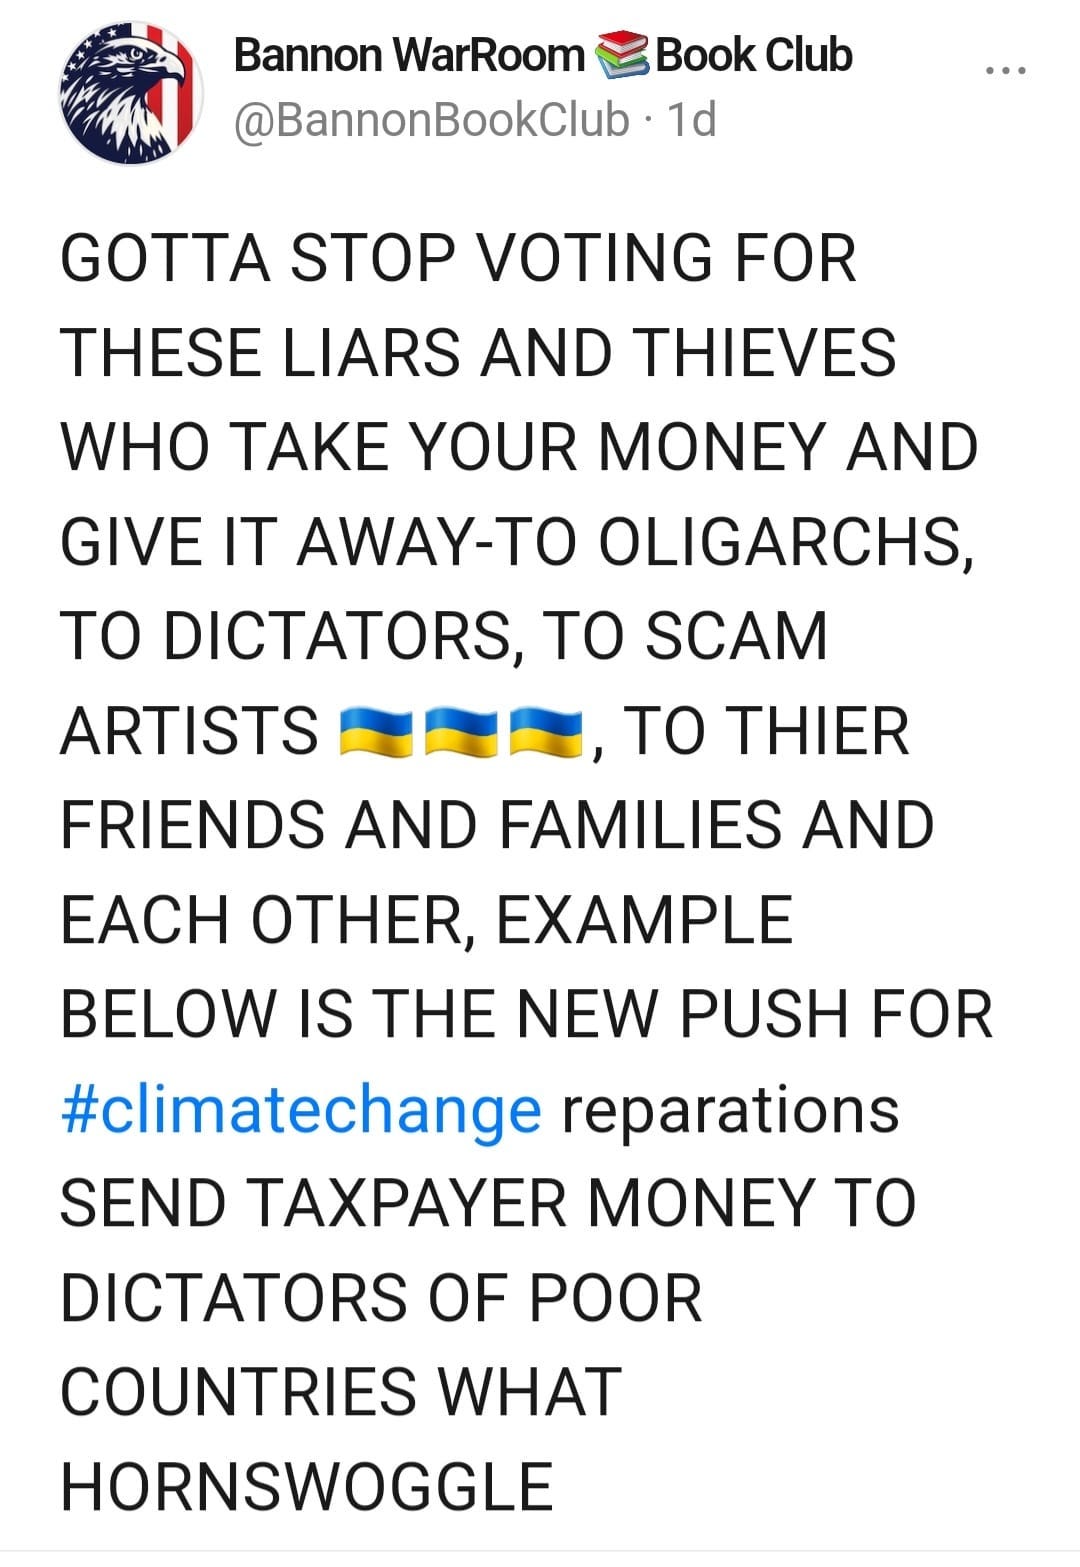 May be an image of text that says 'Bannon WarRoom Book Club @BannonBookClub 1d GOTTA STOP VOTING FOR THESE LIARS AND THIEVES WHO TAKE YOUR MONEY AND GIVE IT AWAY-TO OLIGARCHS ΤΟ DICTATORS, TO SCAM ARTISTS ΤΟ THIER FRIENDS AND FAMILIES AND EACH OTHER, EXAMPLE BELOW IS THE NEW PUSH FOR #climatechange reparations SEND TAXPAYER MONEY ΤΟ DICTATORS OF POOR COUNTRIES WHAT HORNSWOGGLE'